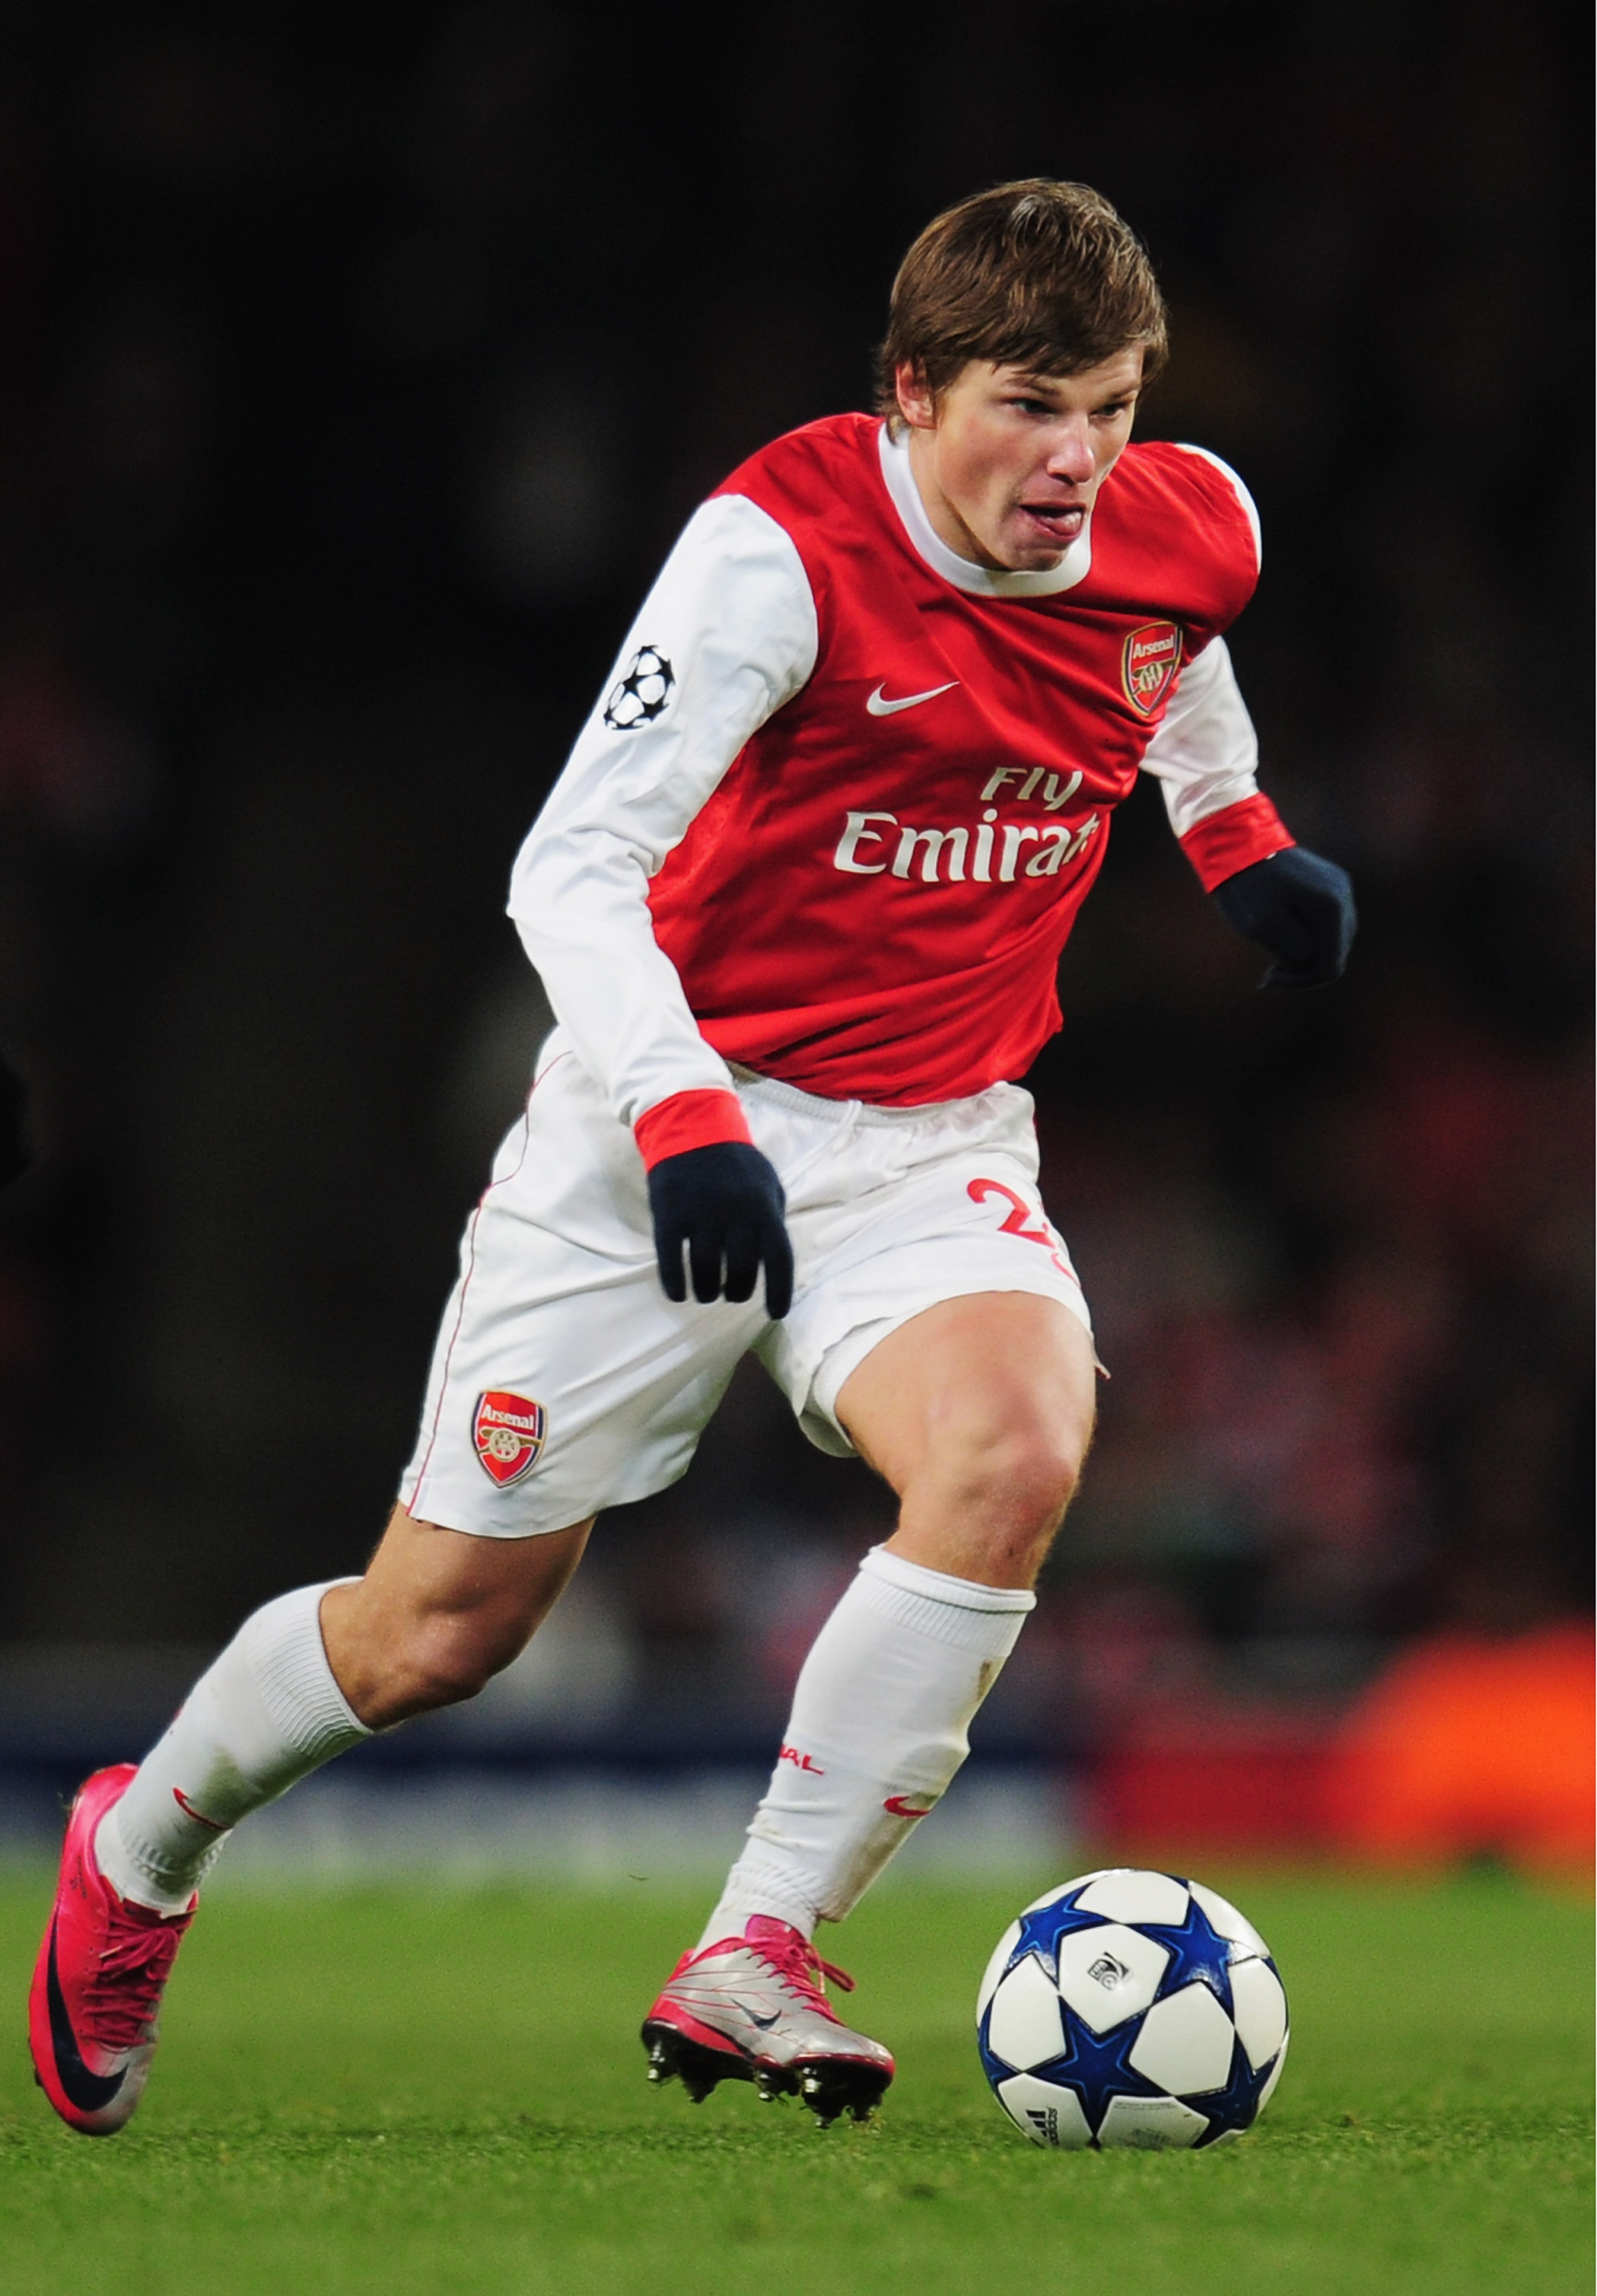 LONDON, ENGLAND - DECEMBER 08:  Andrey Arshavin of Arsenal in action during the UEFA Champions League Group H match between Arsenal and FK Partizan Belgrade at the Emirates Stadium on December 8, 2010 in London, England.  (Photo by Shaun Botterill/Getty I